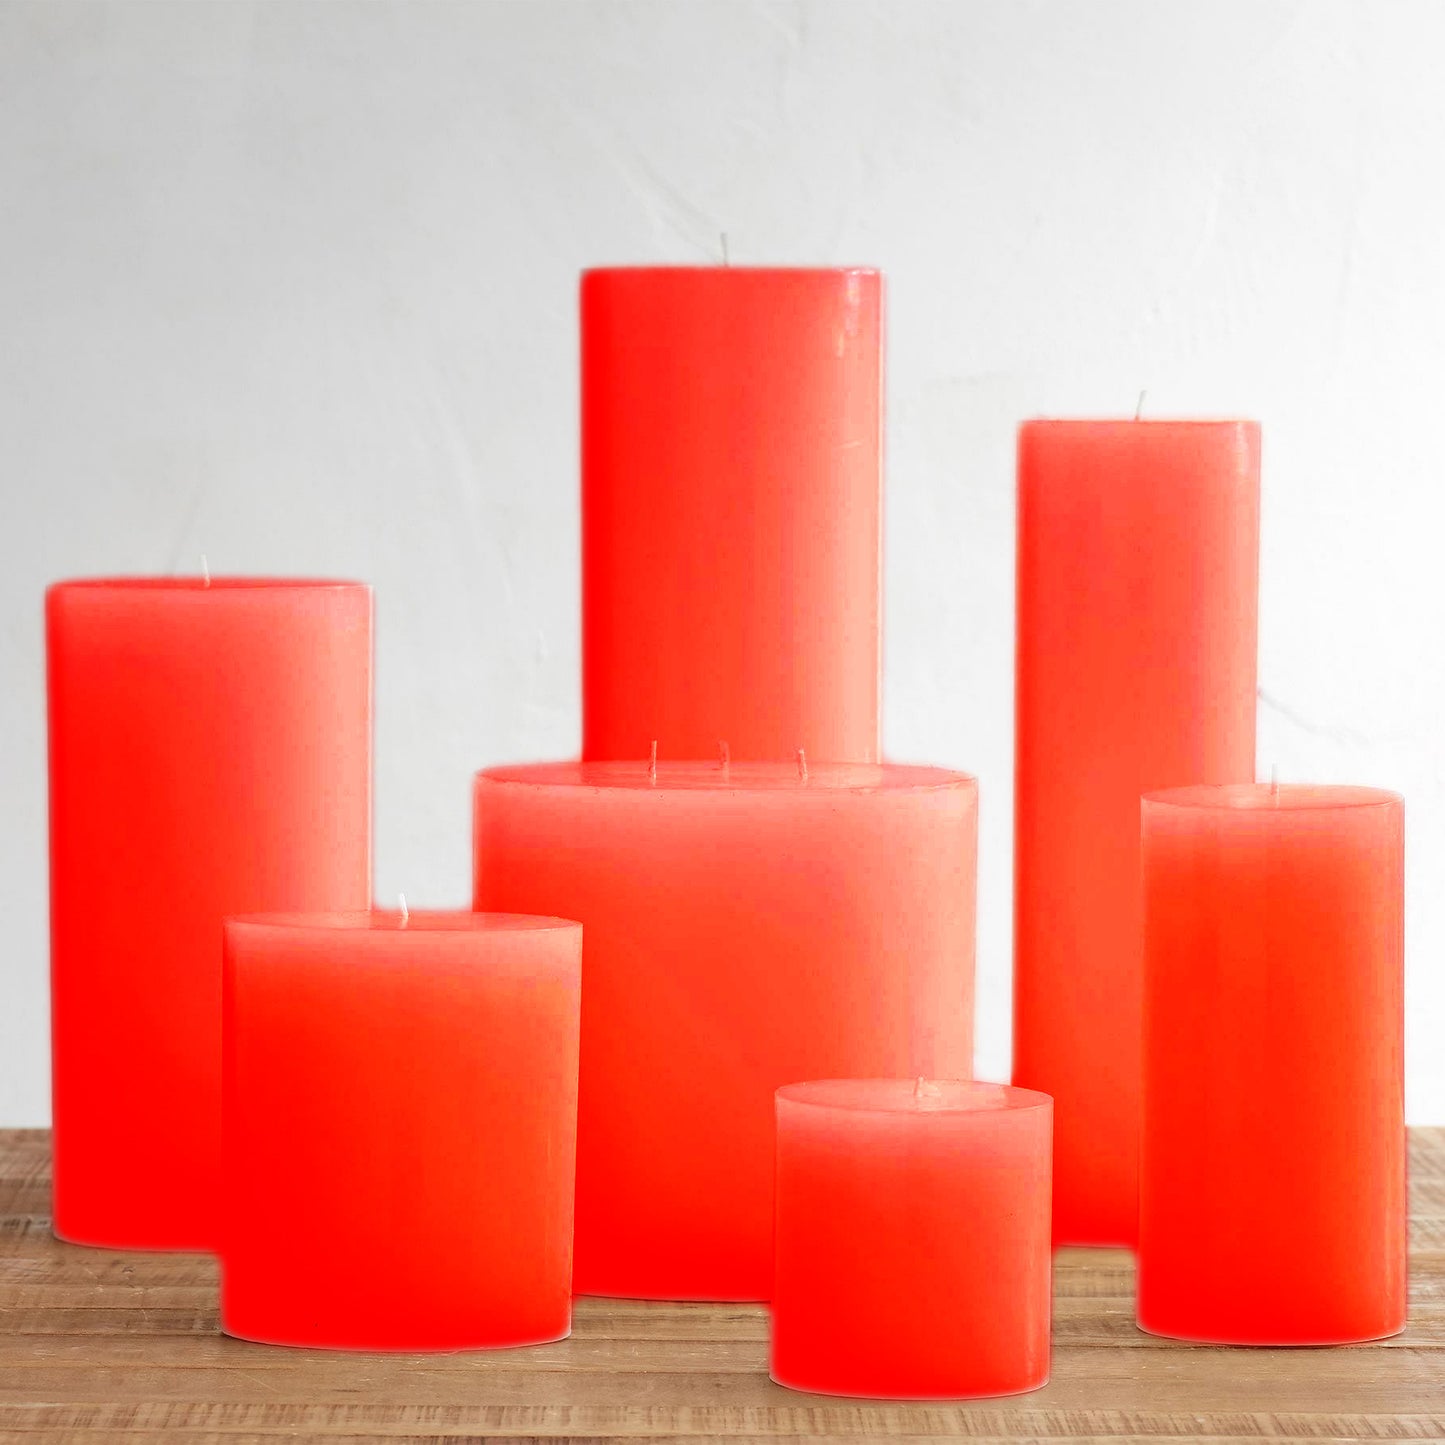 3"x3" Unscented Red Pillar Candle  WICK & WAX   